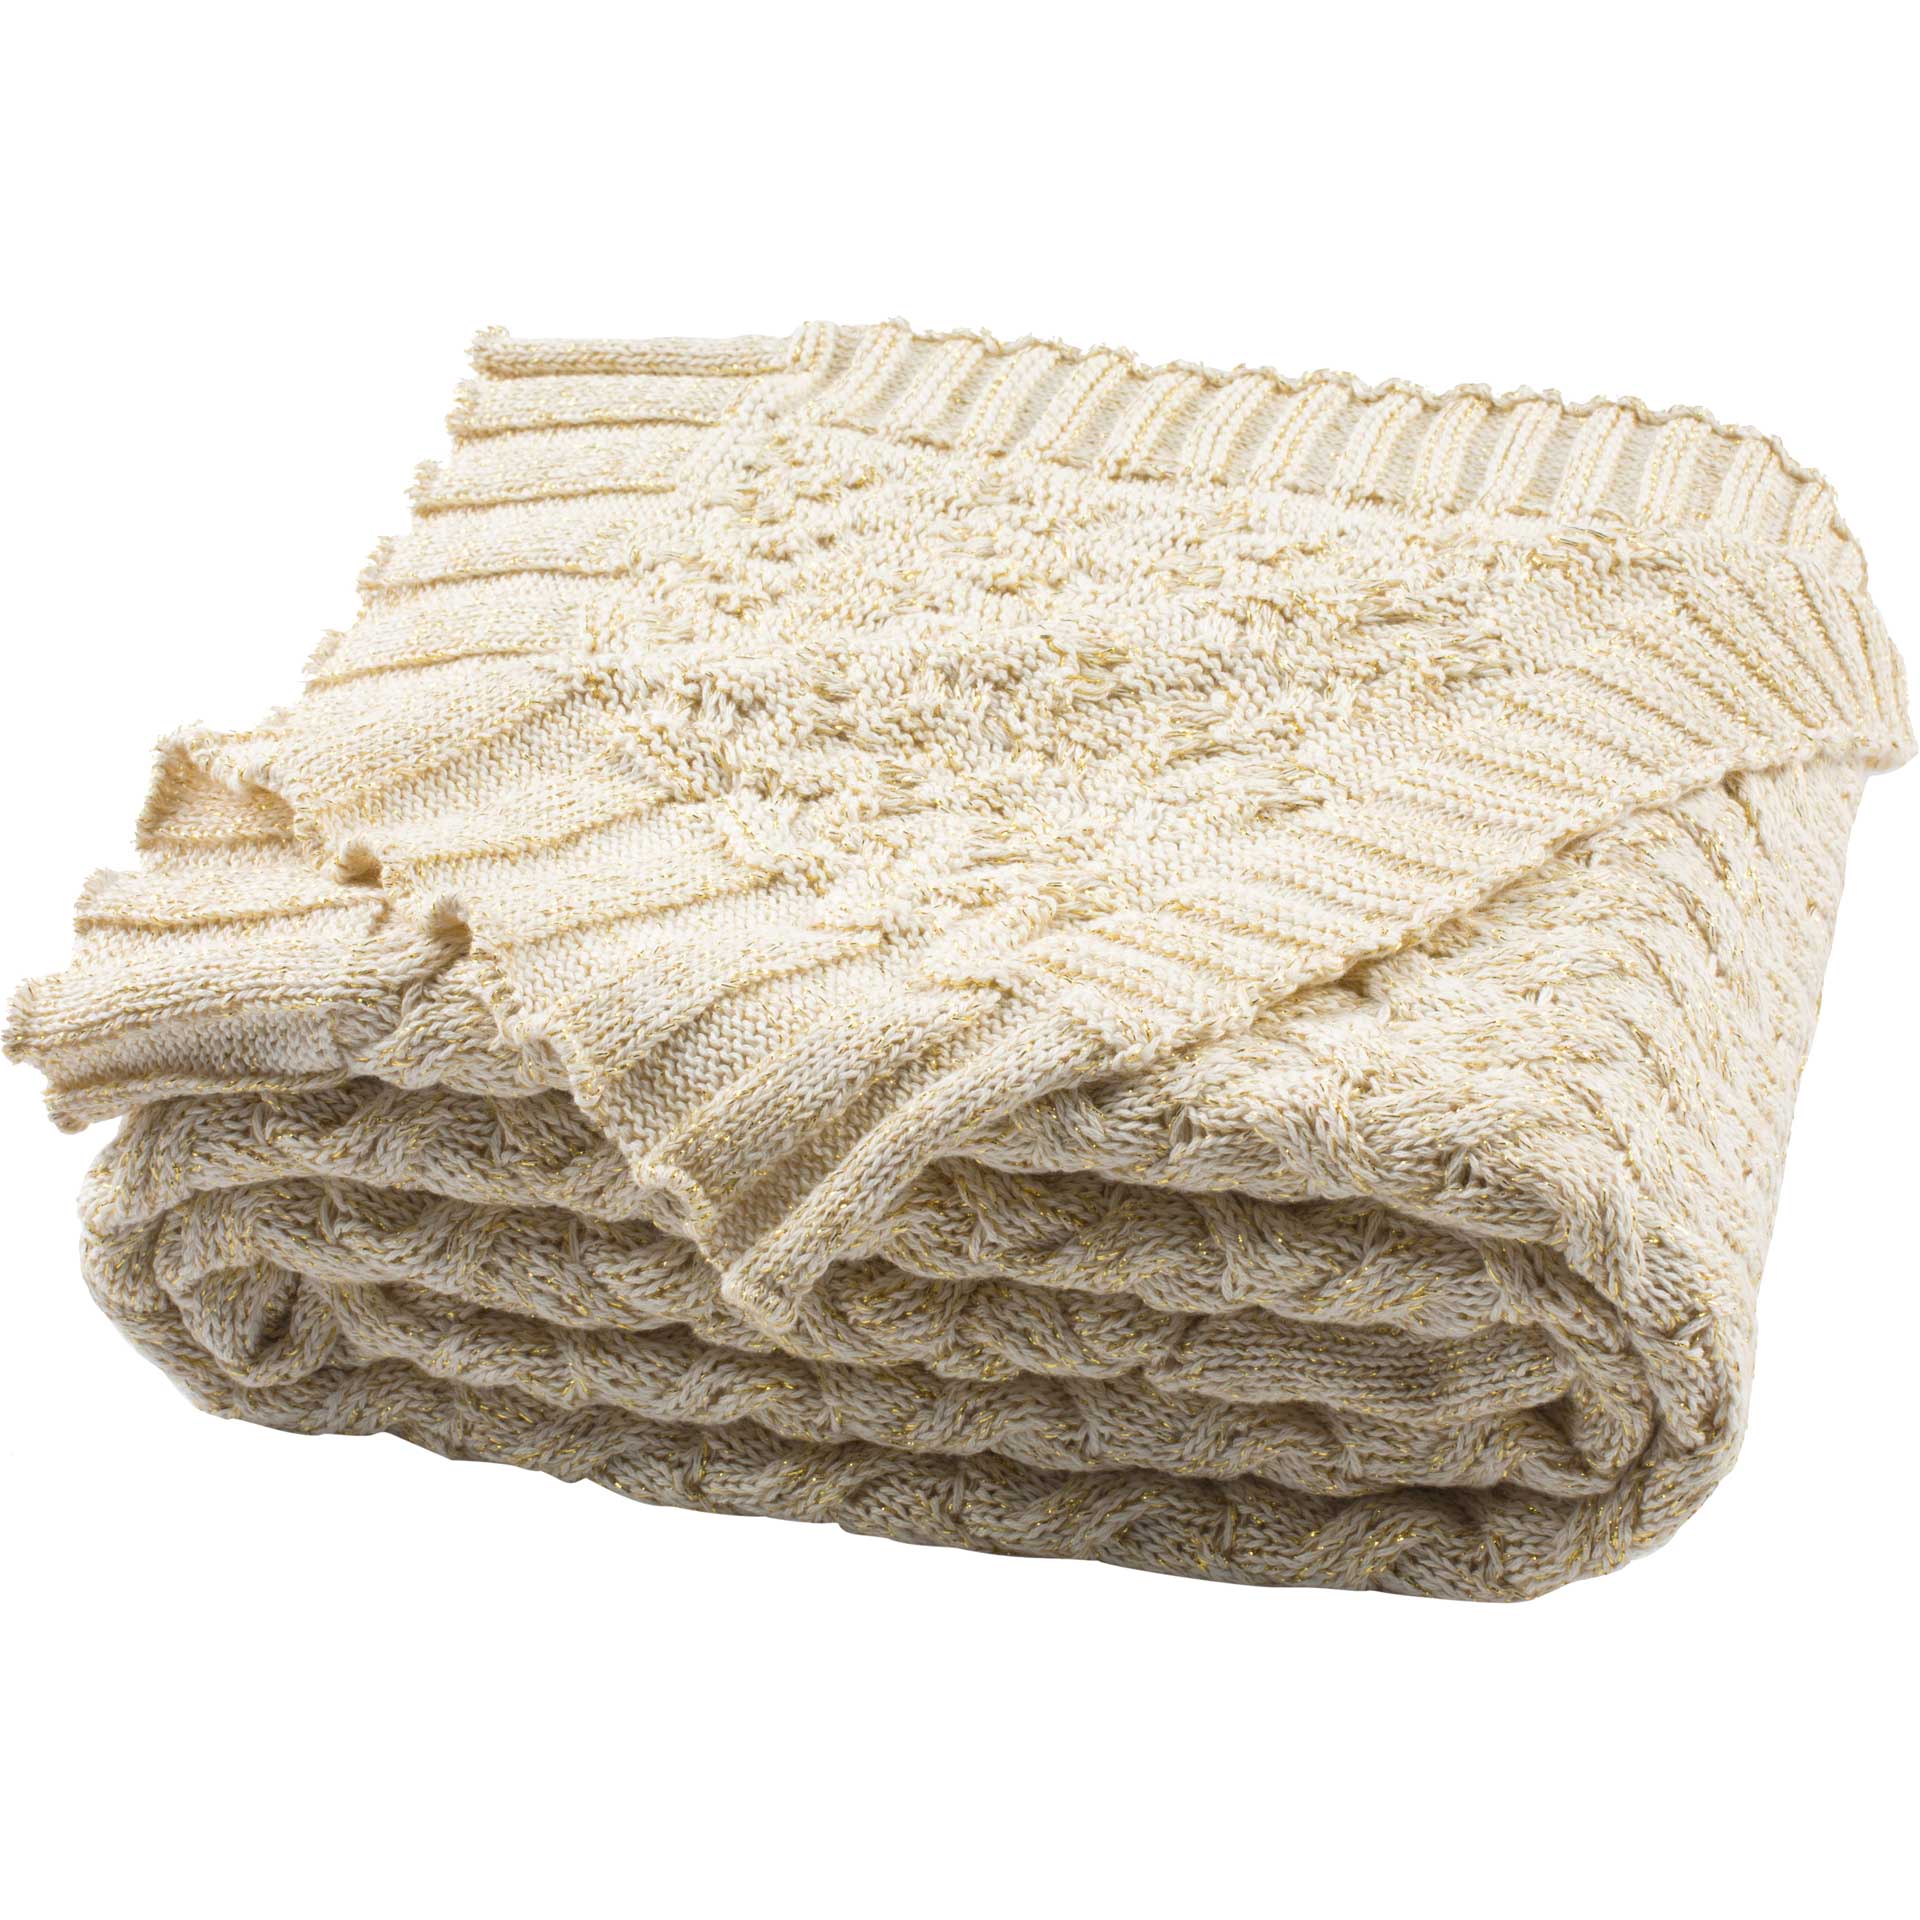 Admiration Knit Throw Natural/Gold